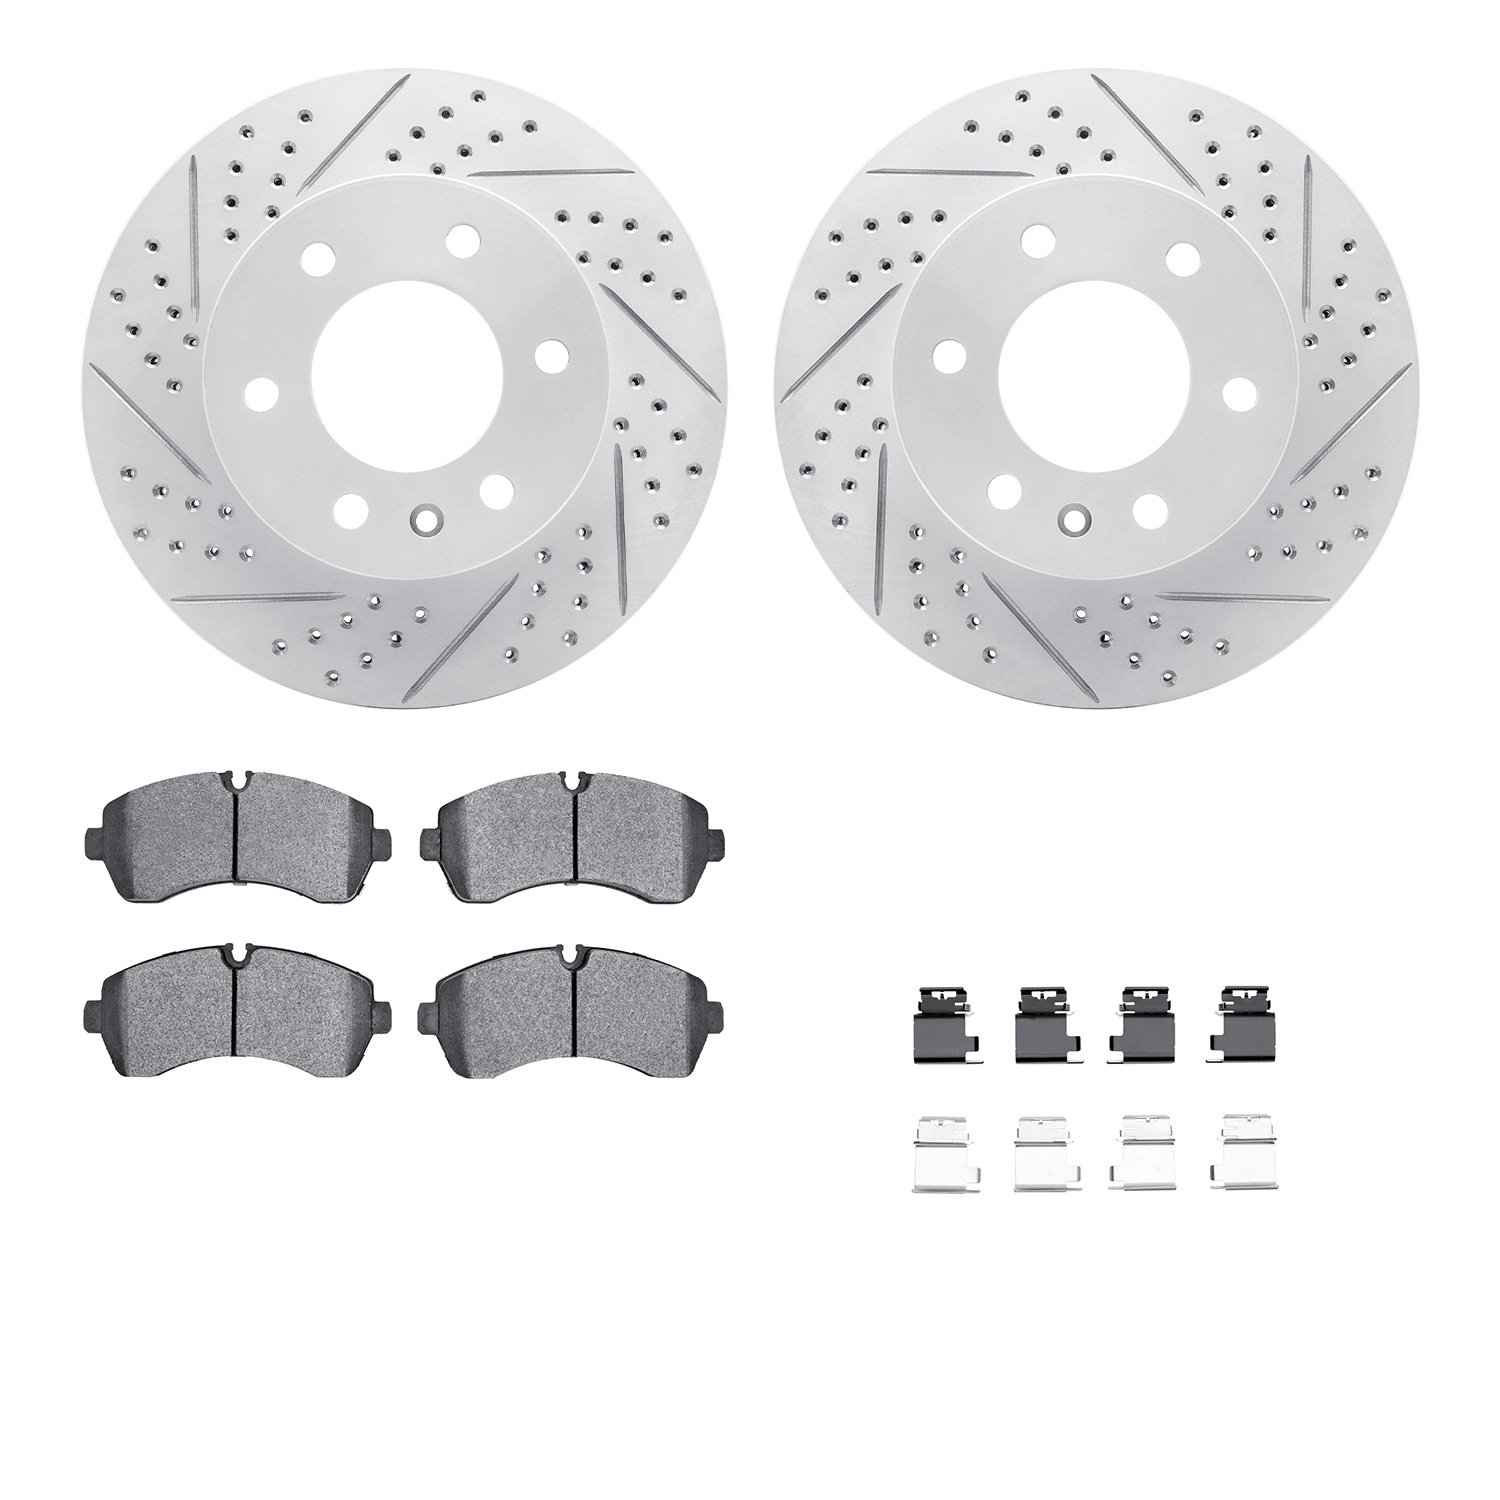 2212-40029 Geoperformance Drilled/Slotted Rotors w/Heavy-Duty Pads Kit & Hardware, Fits Select Multiple Makes/Models, Position: